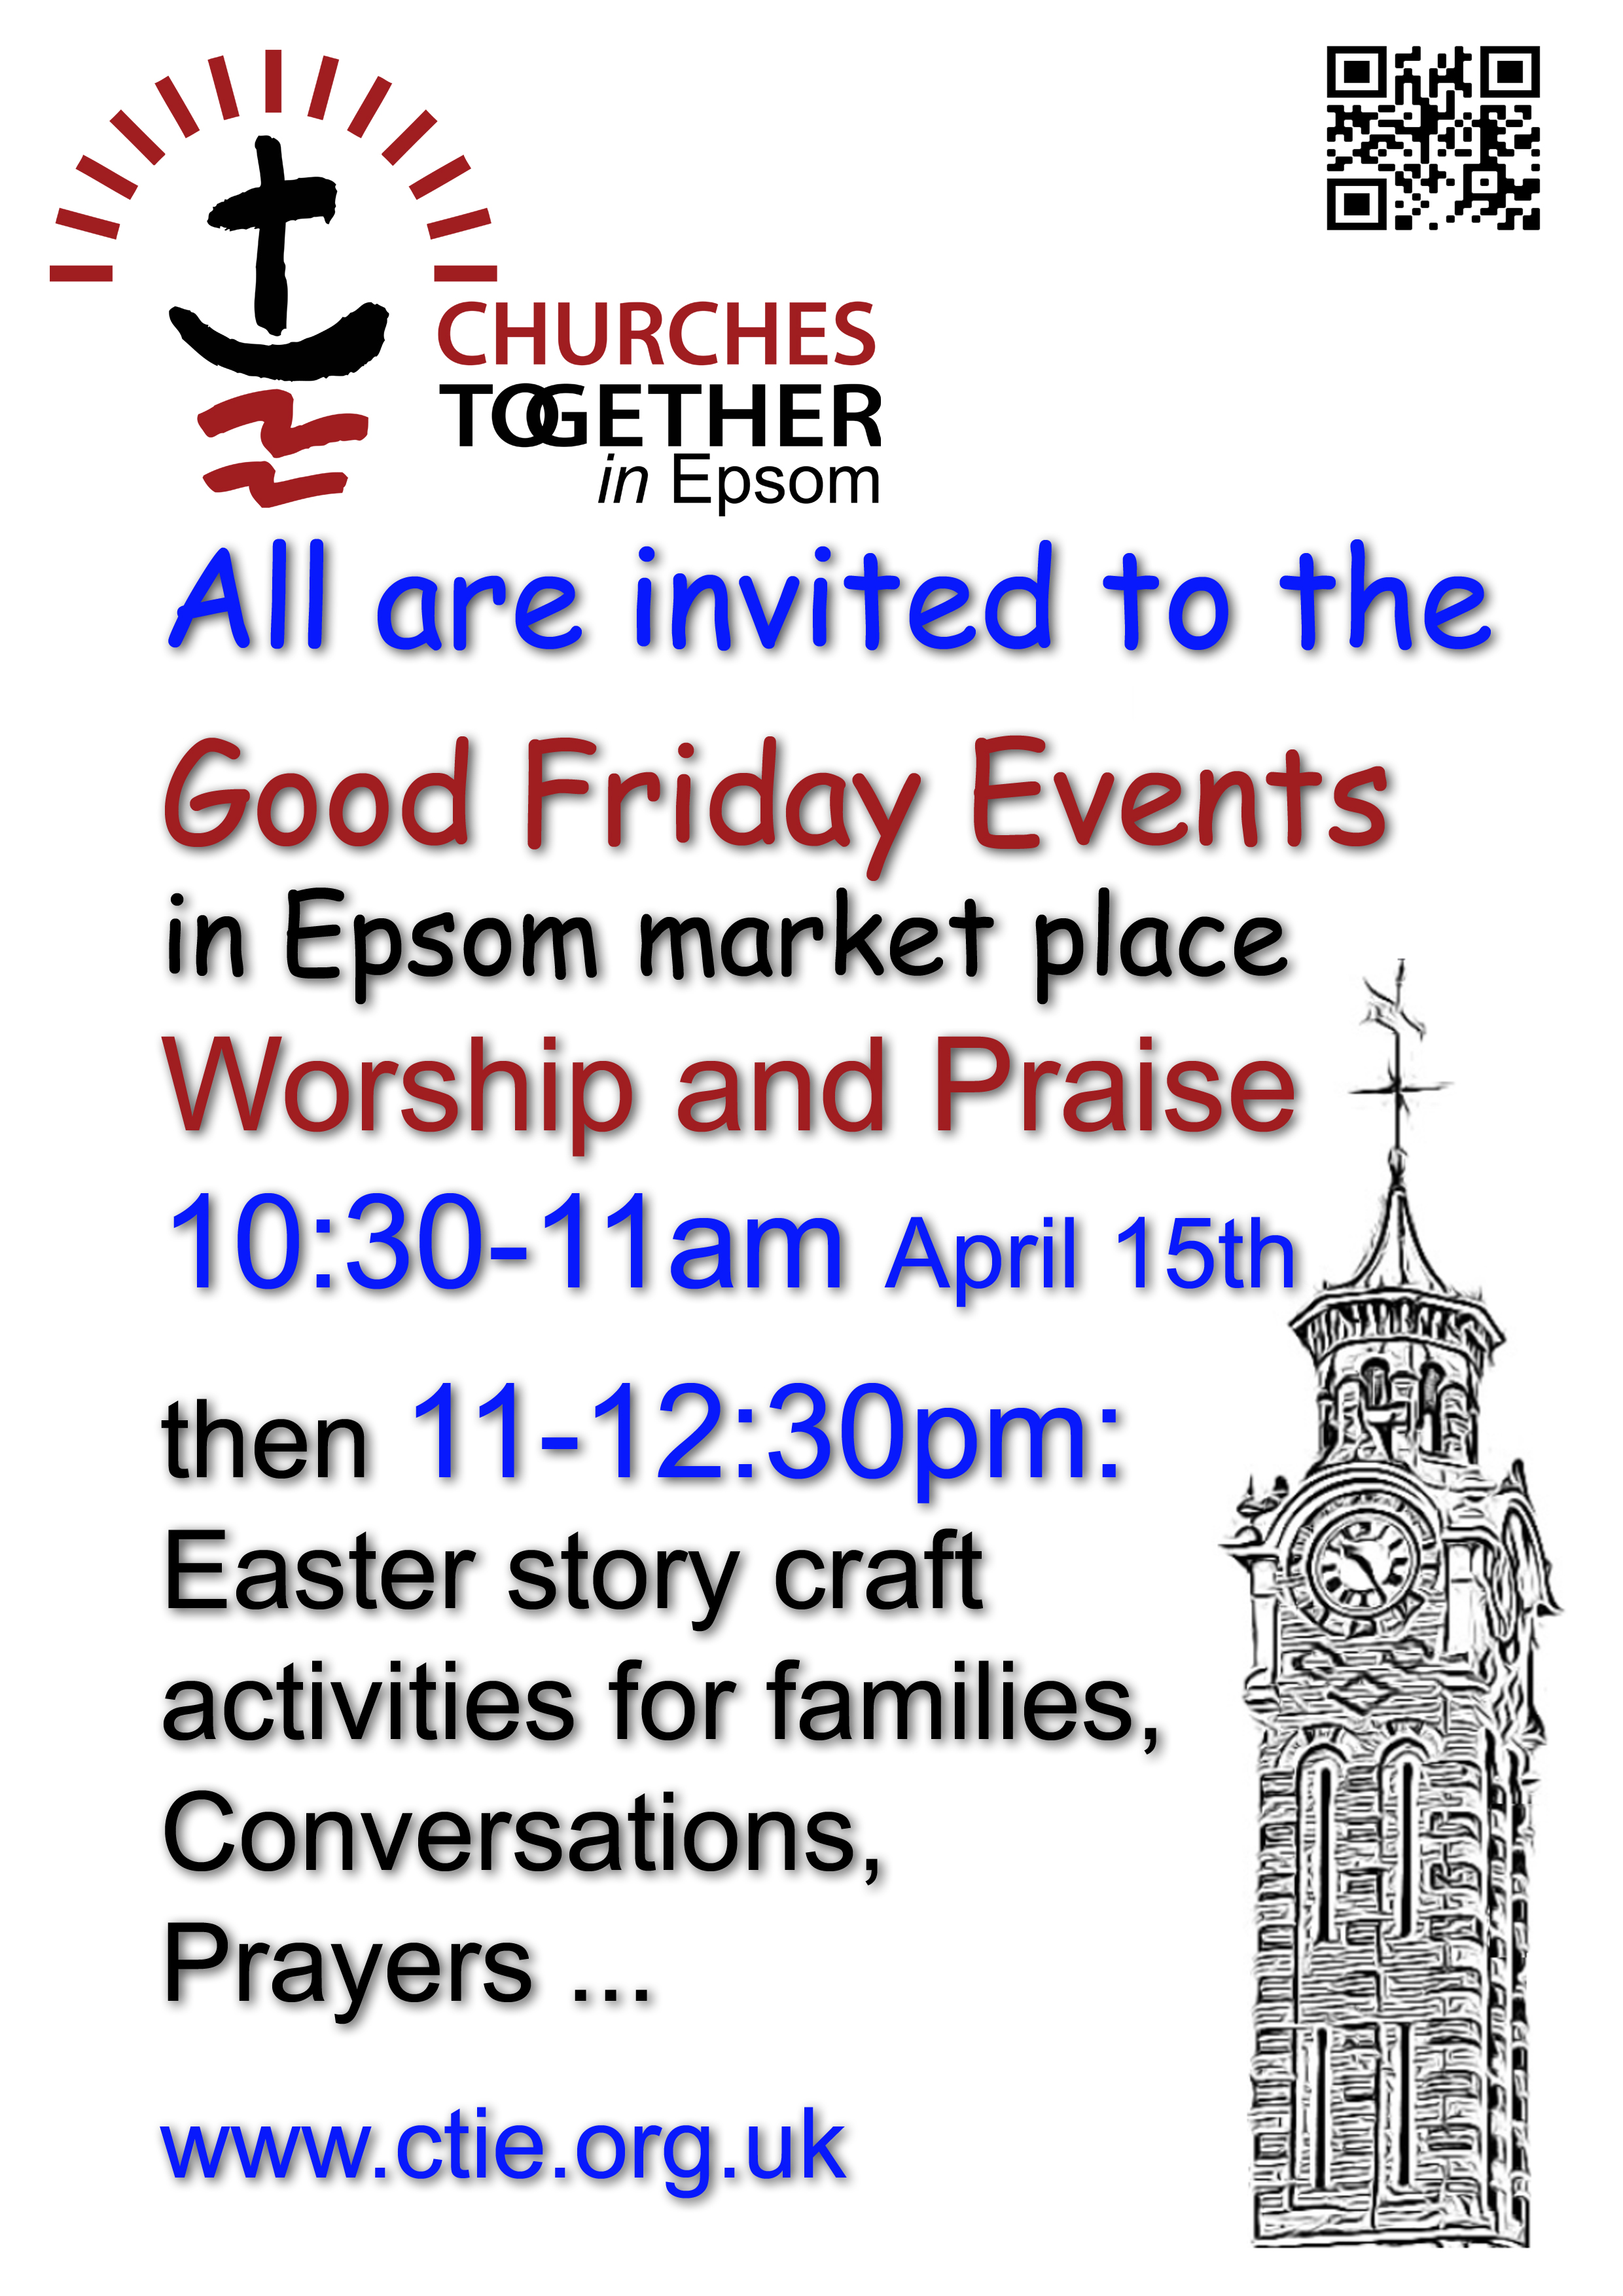 Come, with your friends and neighbours, to an open-air ecumenical service of Worship and Praise